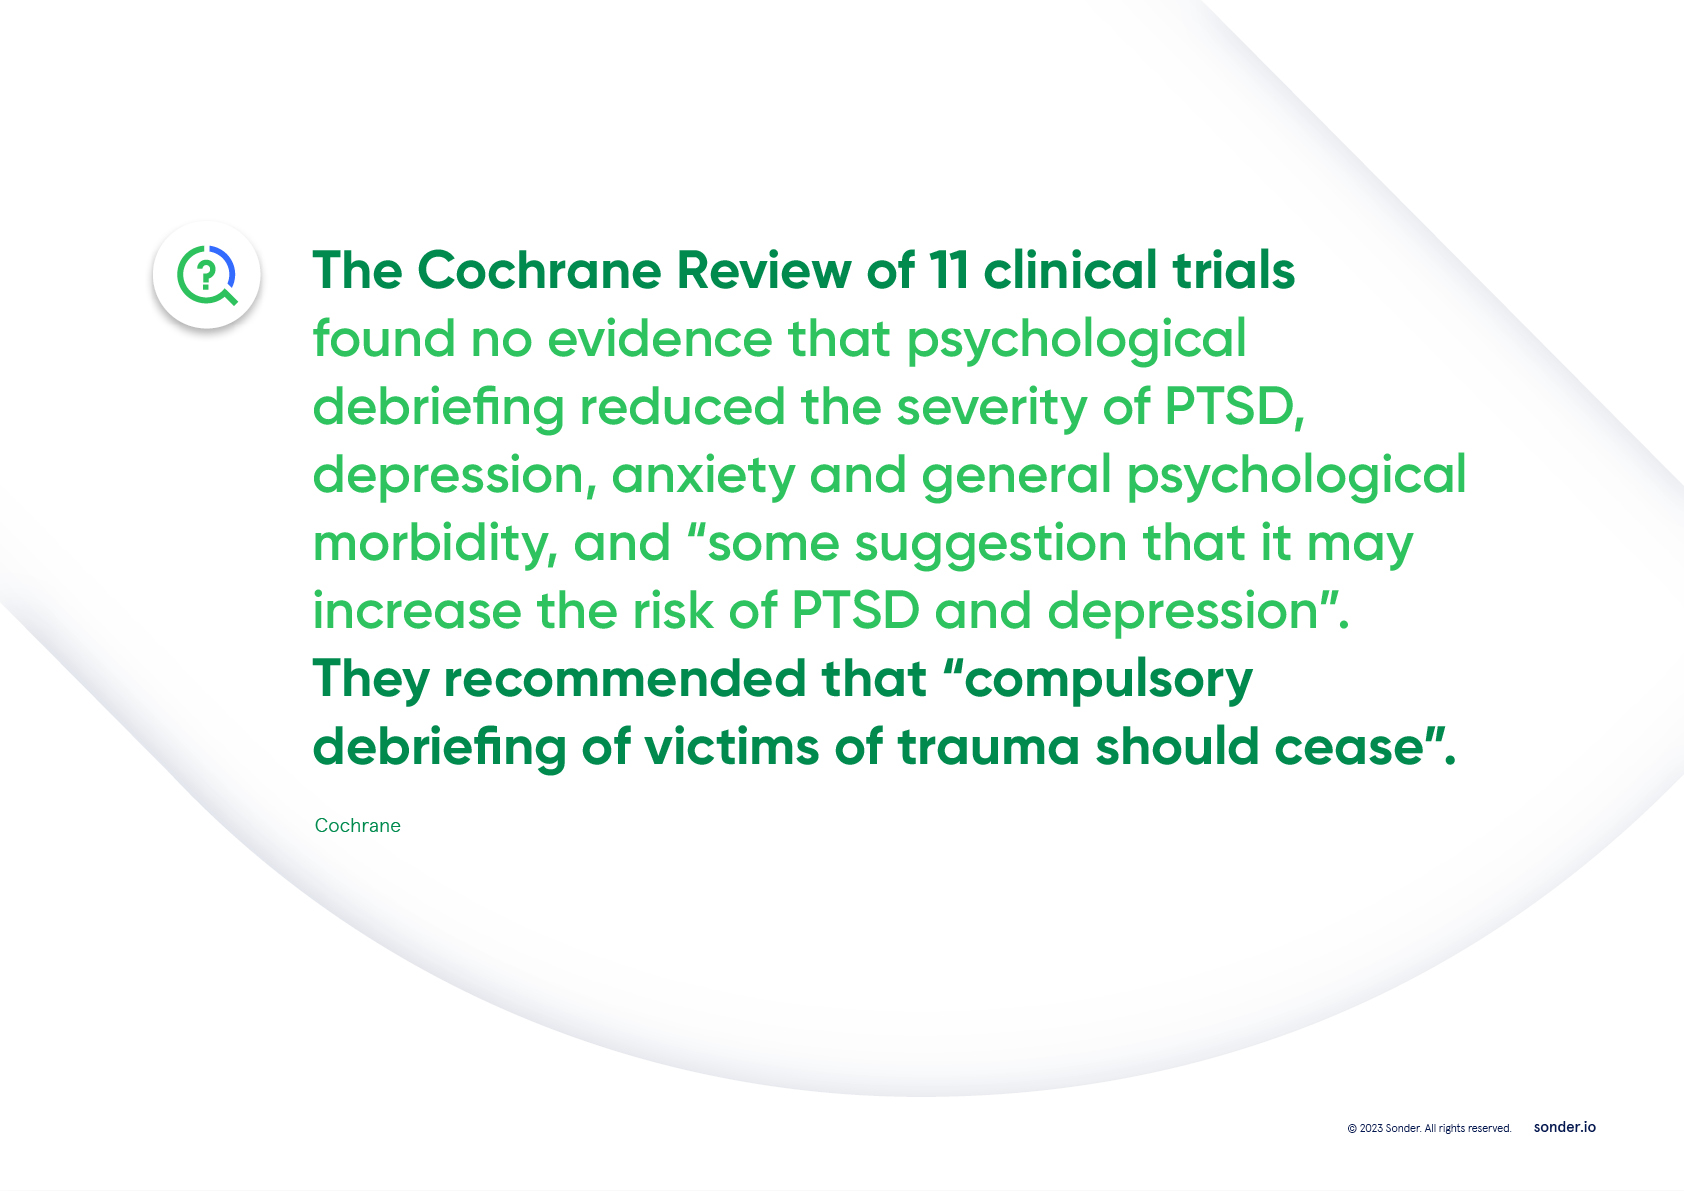 The Cochrane Review of 11 clinical trials found no evidence that psychological debriefing reduced the severity of PTSD.